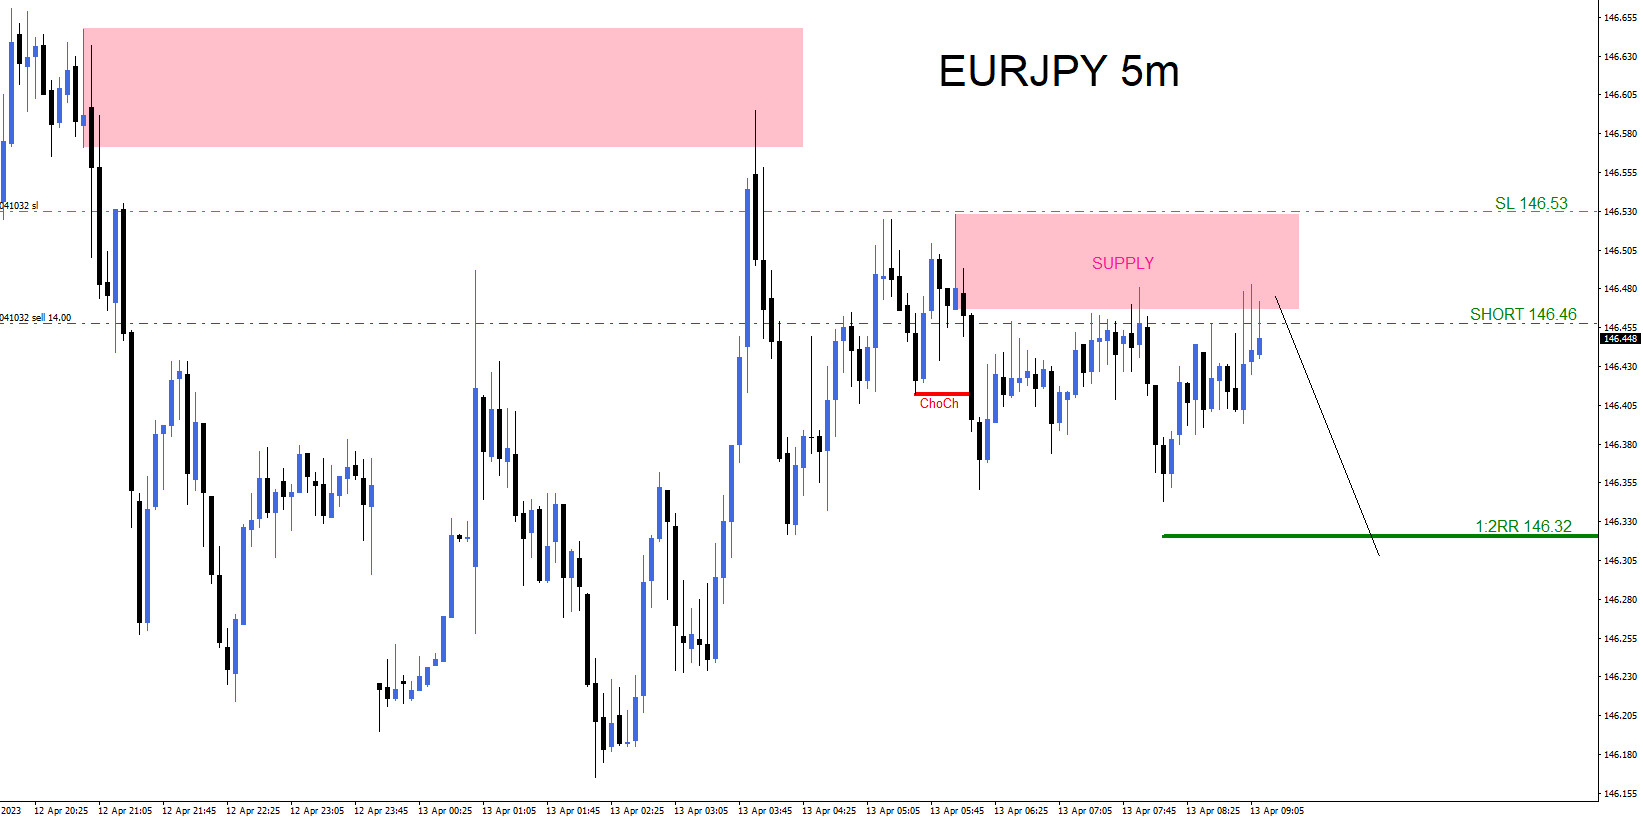 EURJPY : Scalping the Move Lower